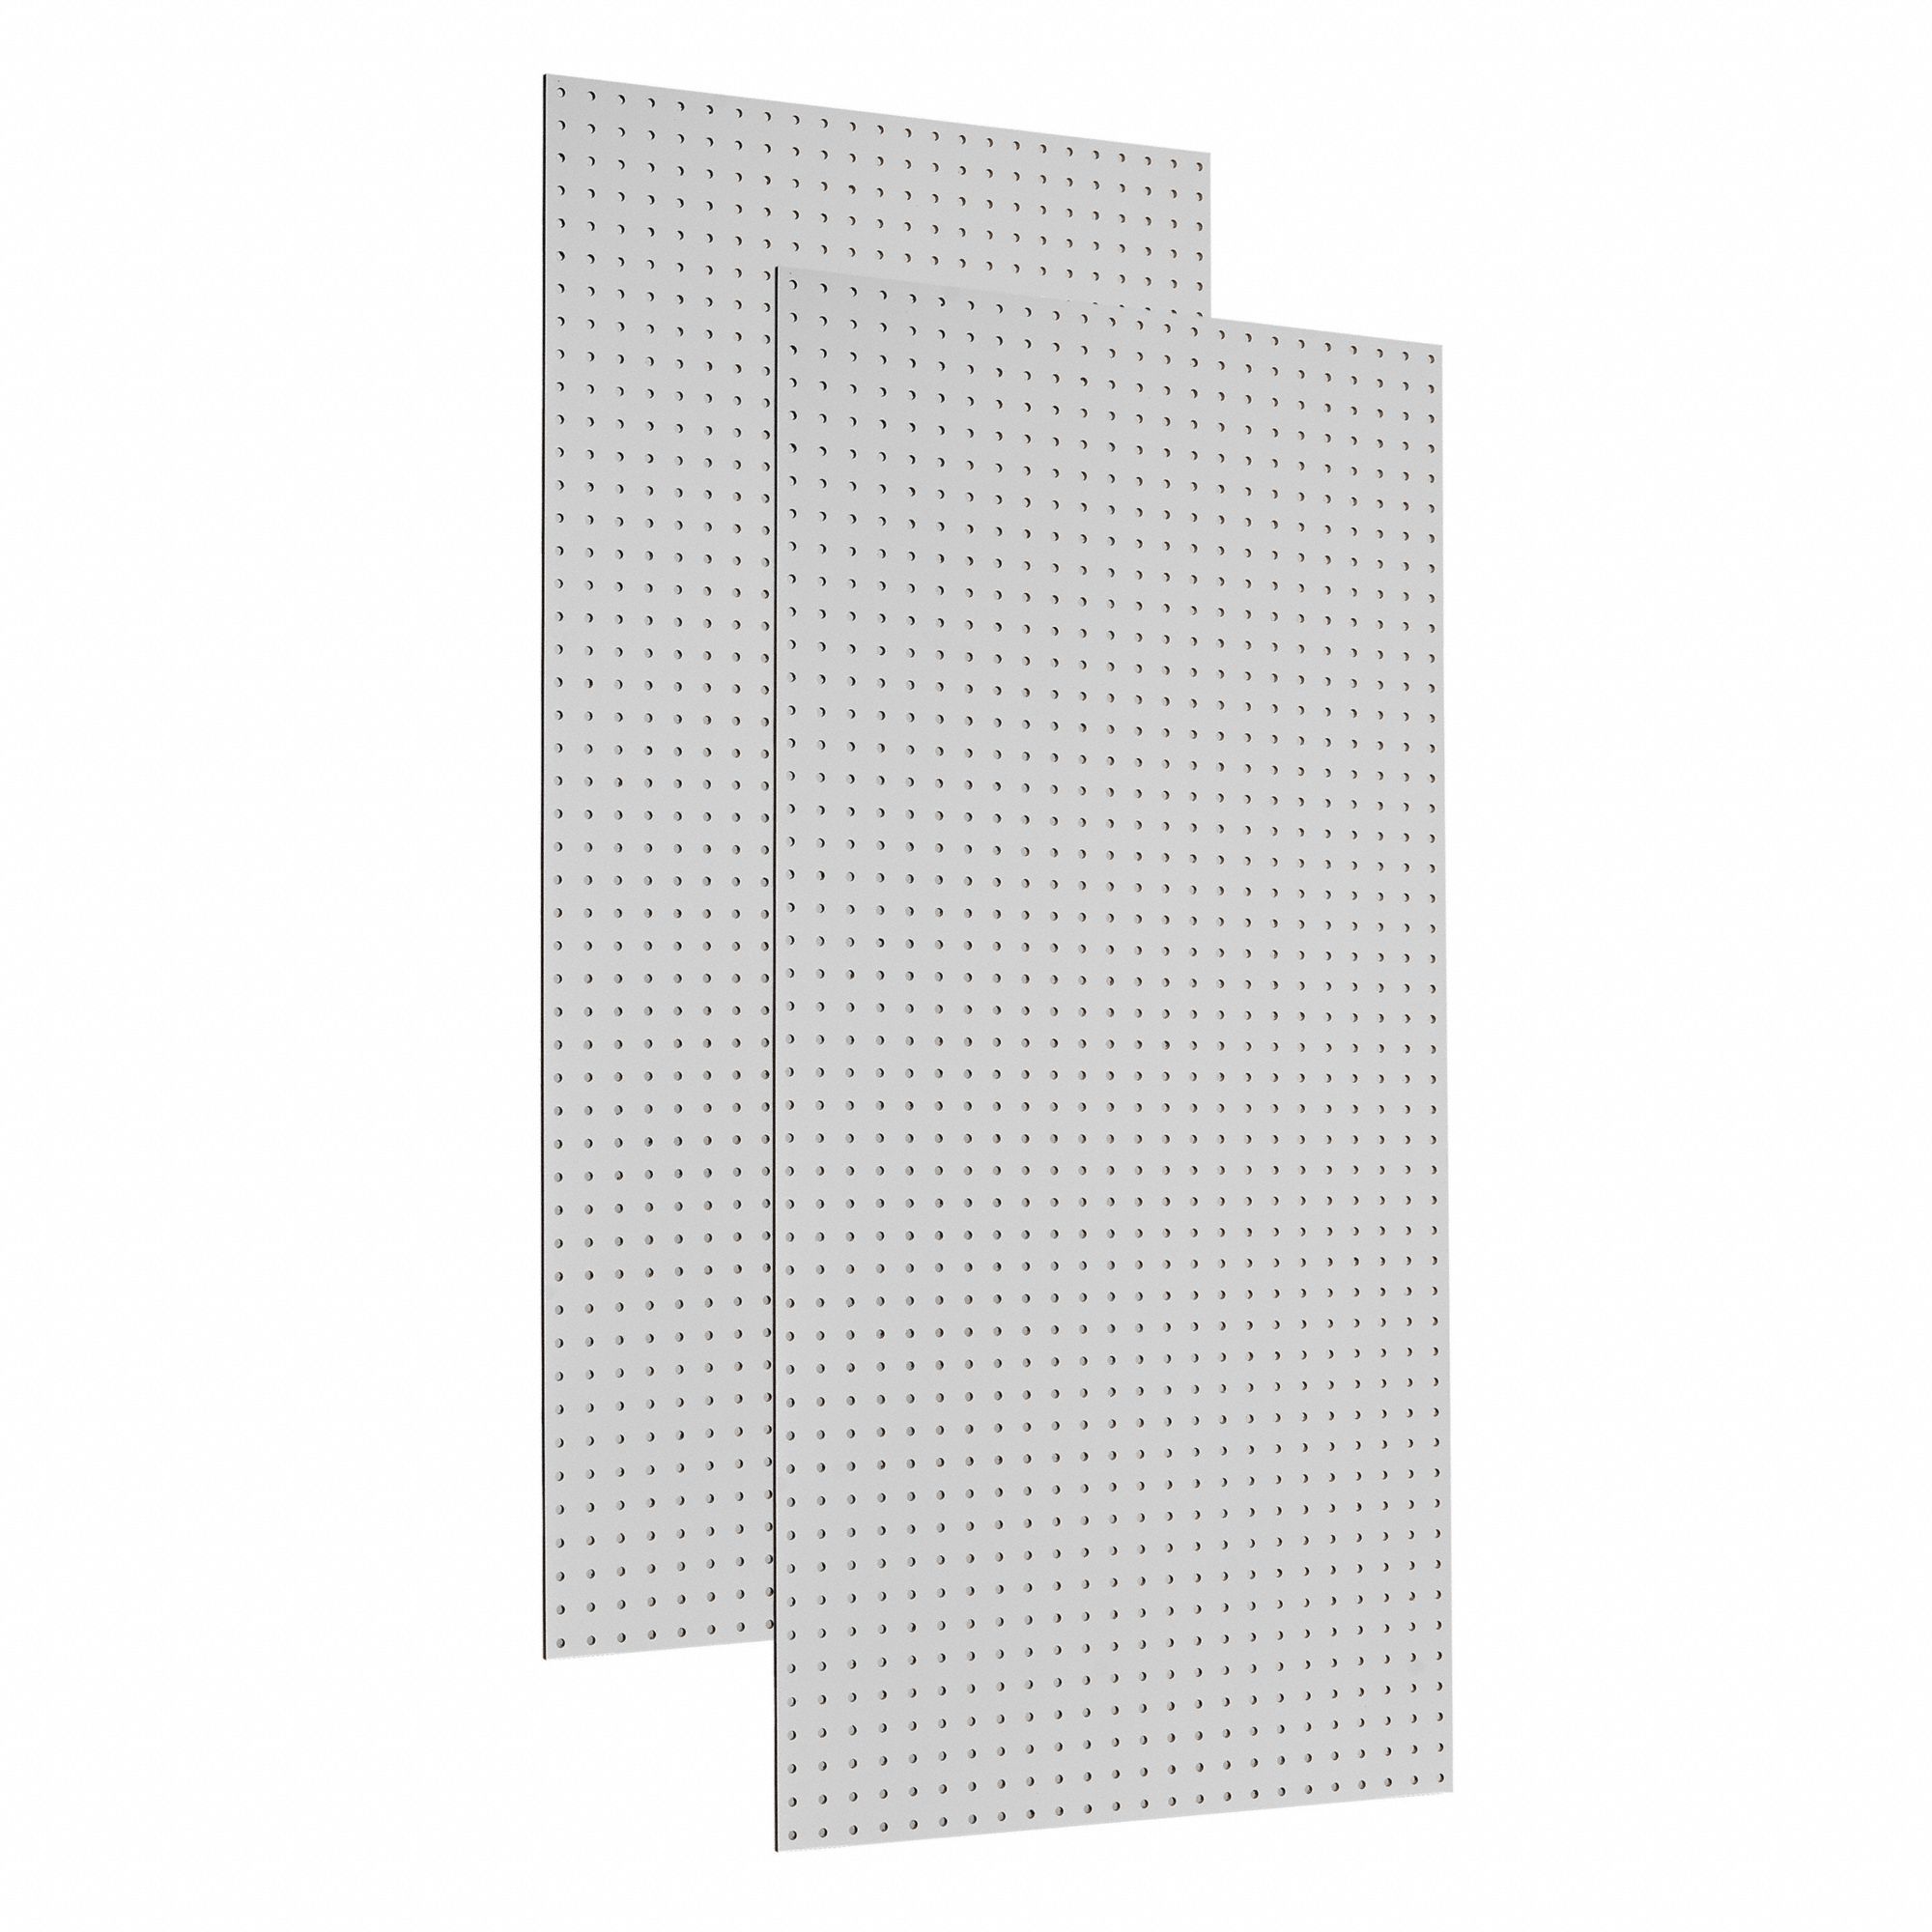 Pegboard Panel: Round, 1/4 in Peg Hole Size, 48 in x 24 in x 1/8 in